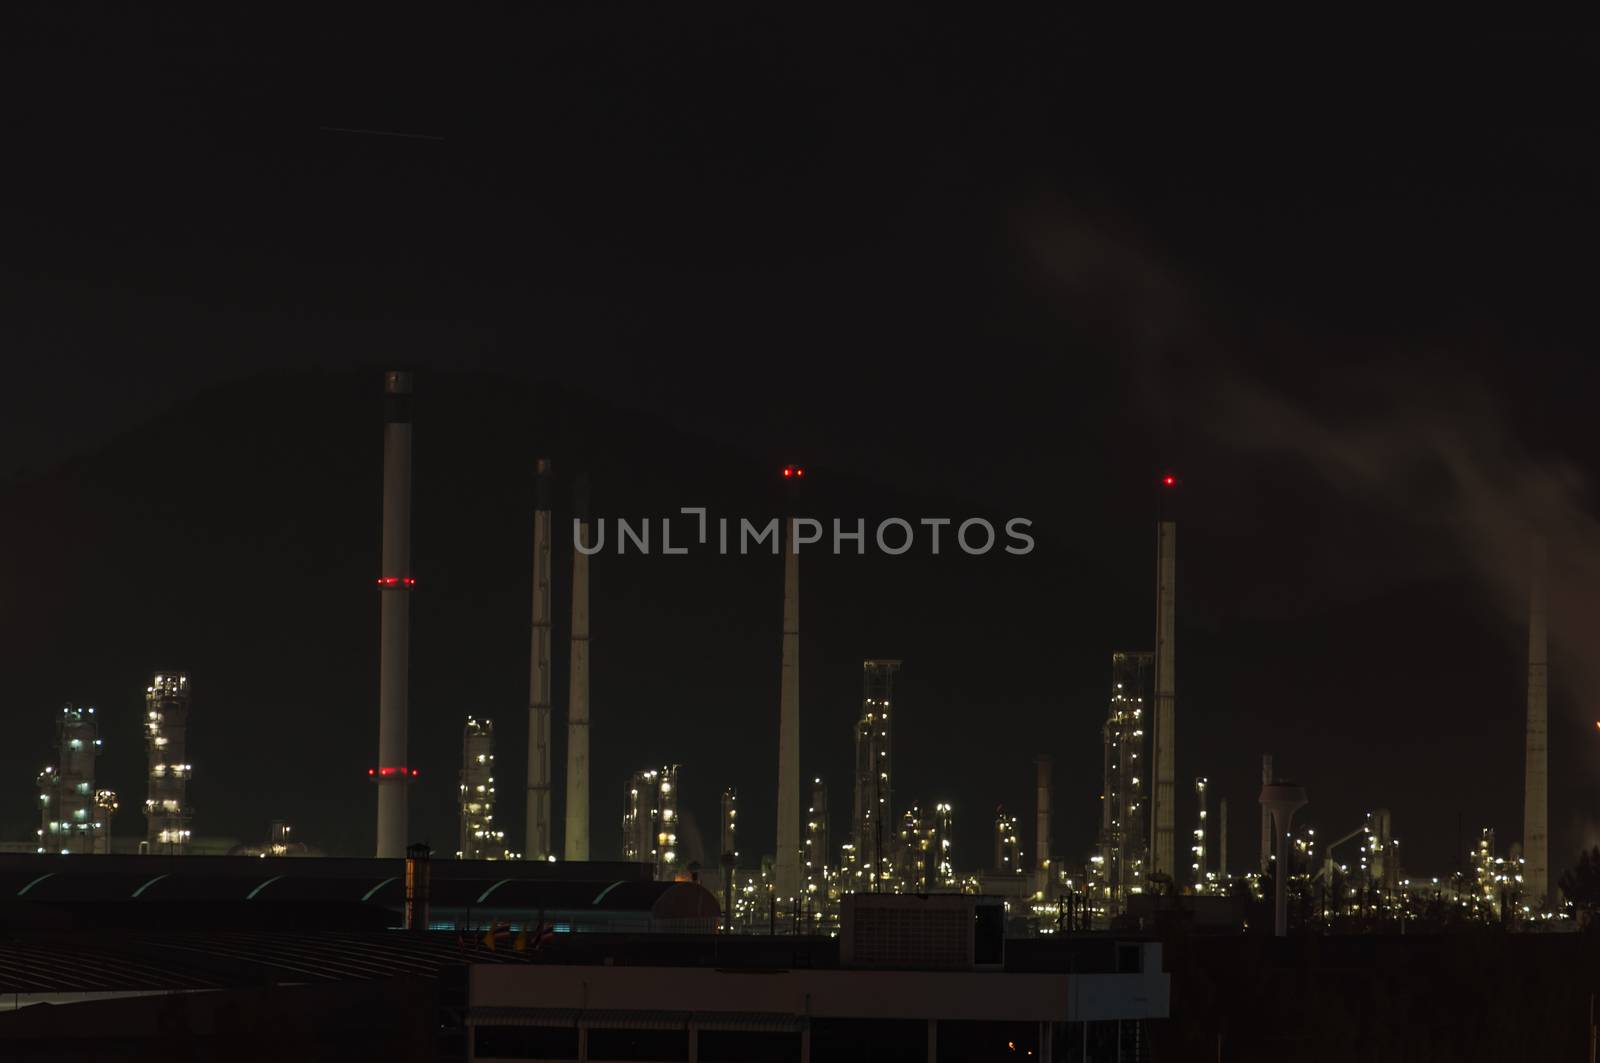 Oil refinery plant at dusk, power station